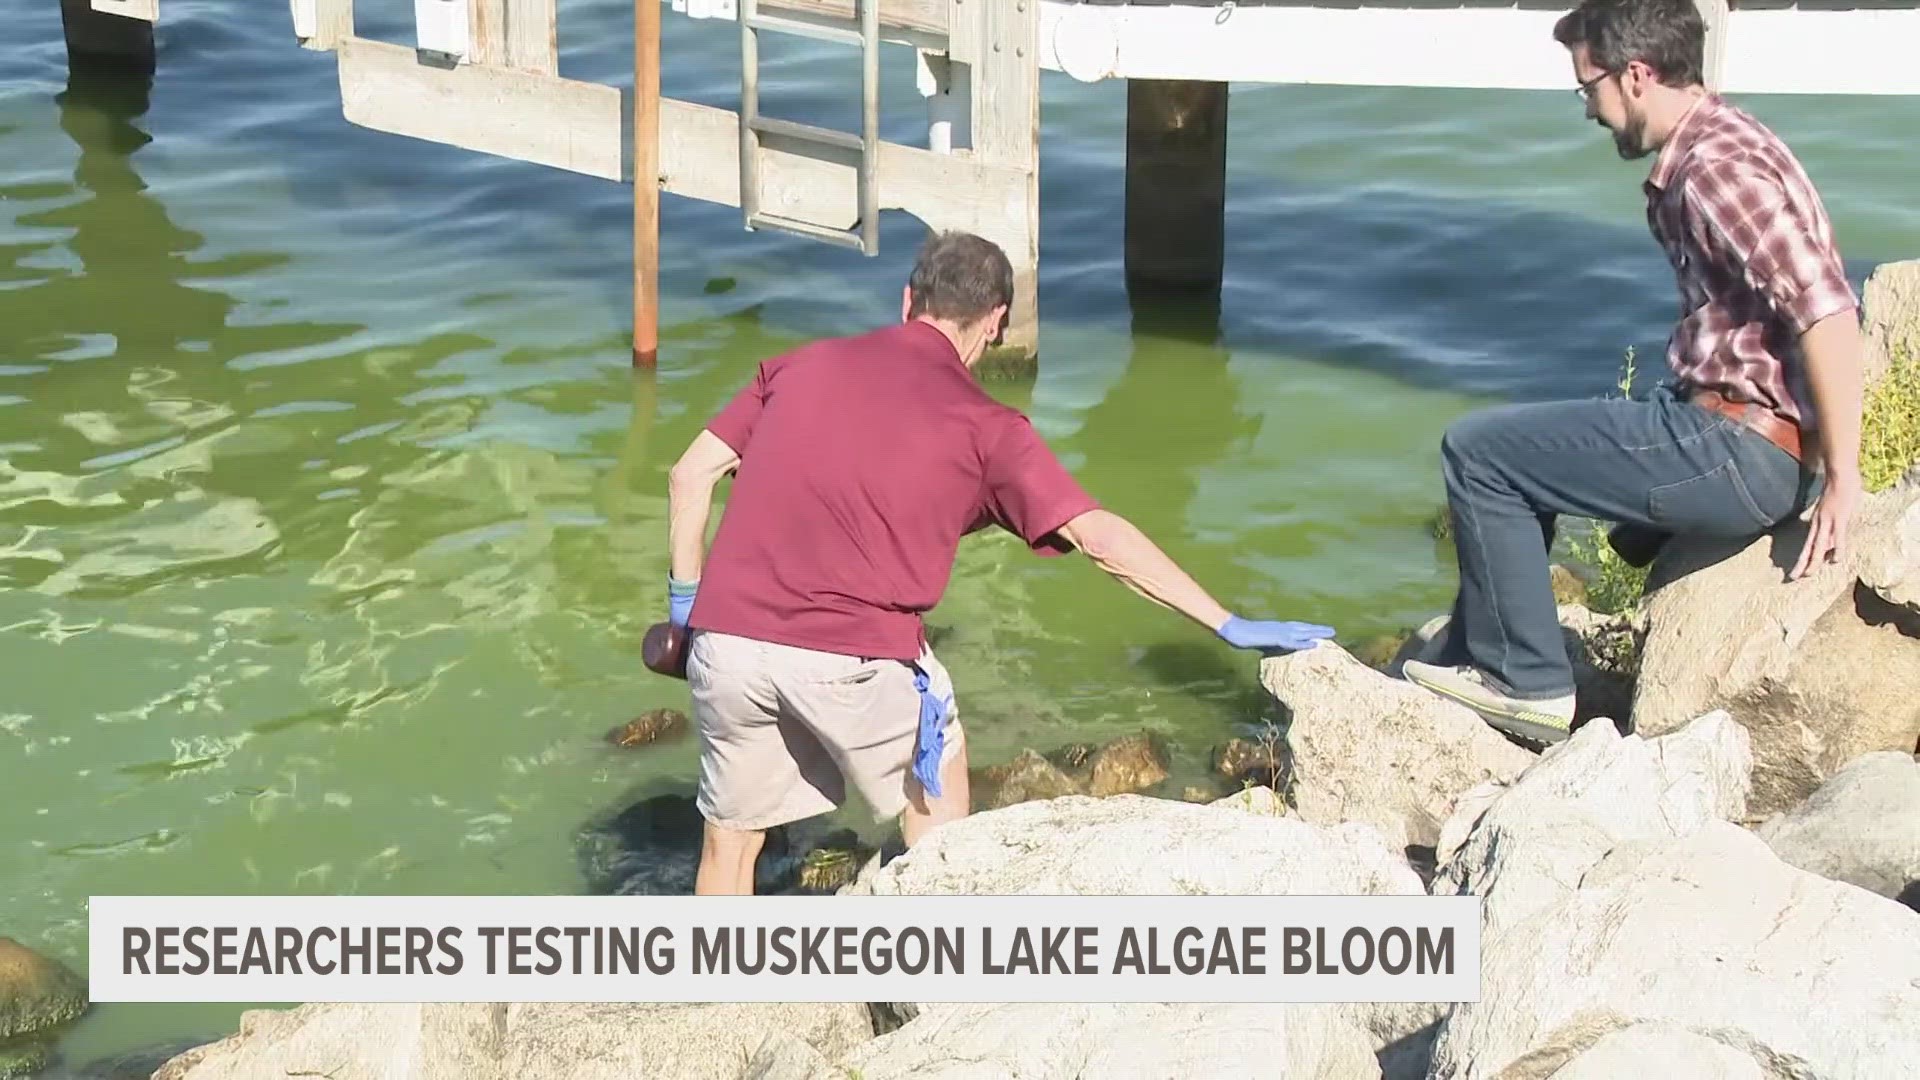 While testing is needed to determine the type, the bloom appears to be blue-green algae. Officials are warning kids and pets to stay out of the water for now.